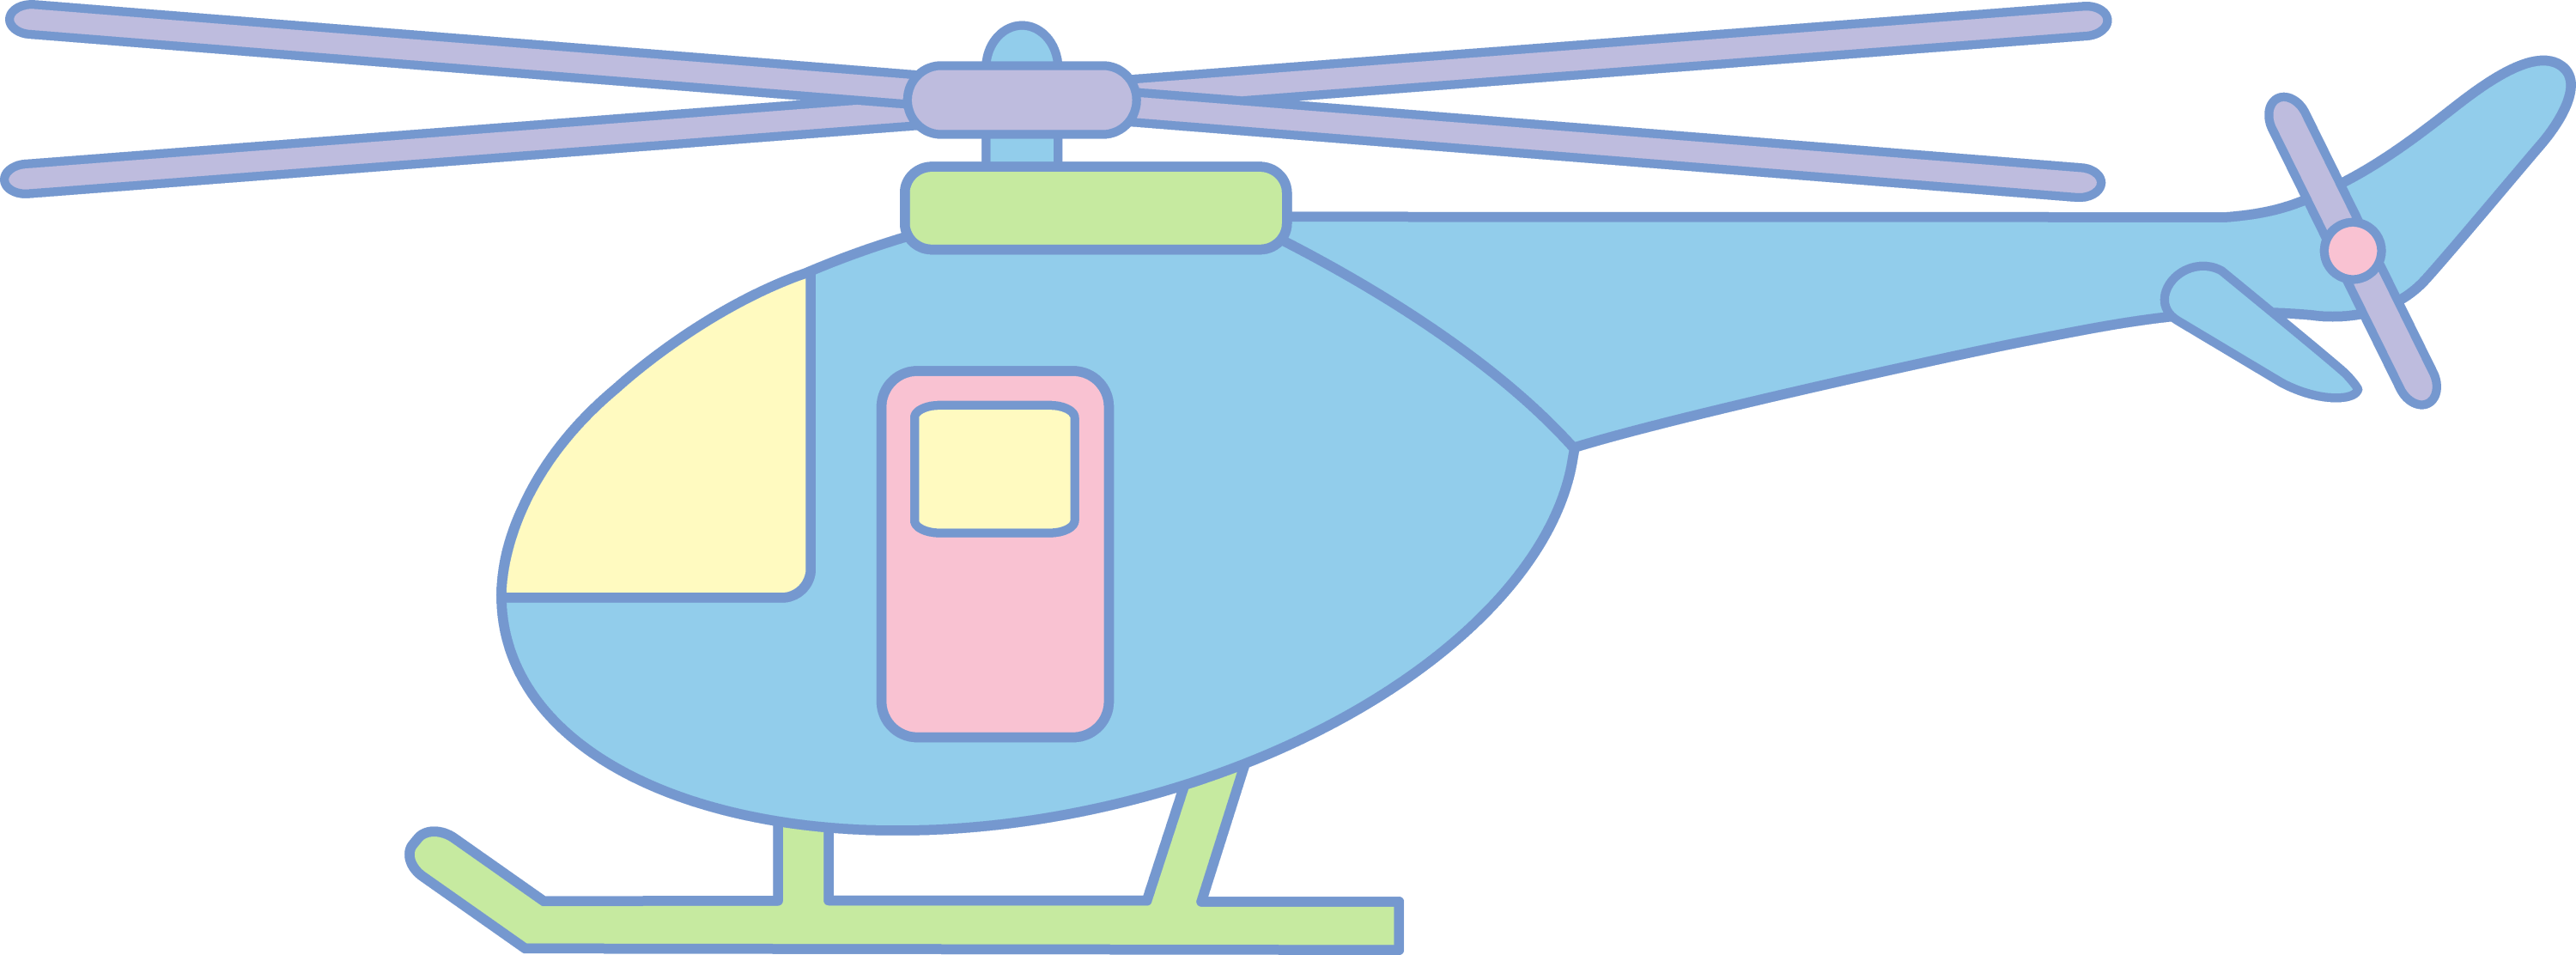 clipart of helicopter - photo #21